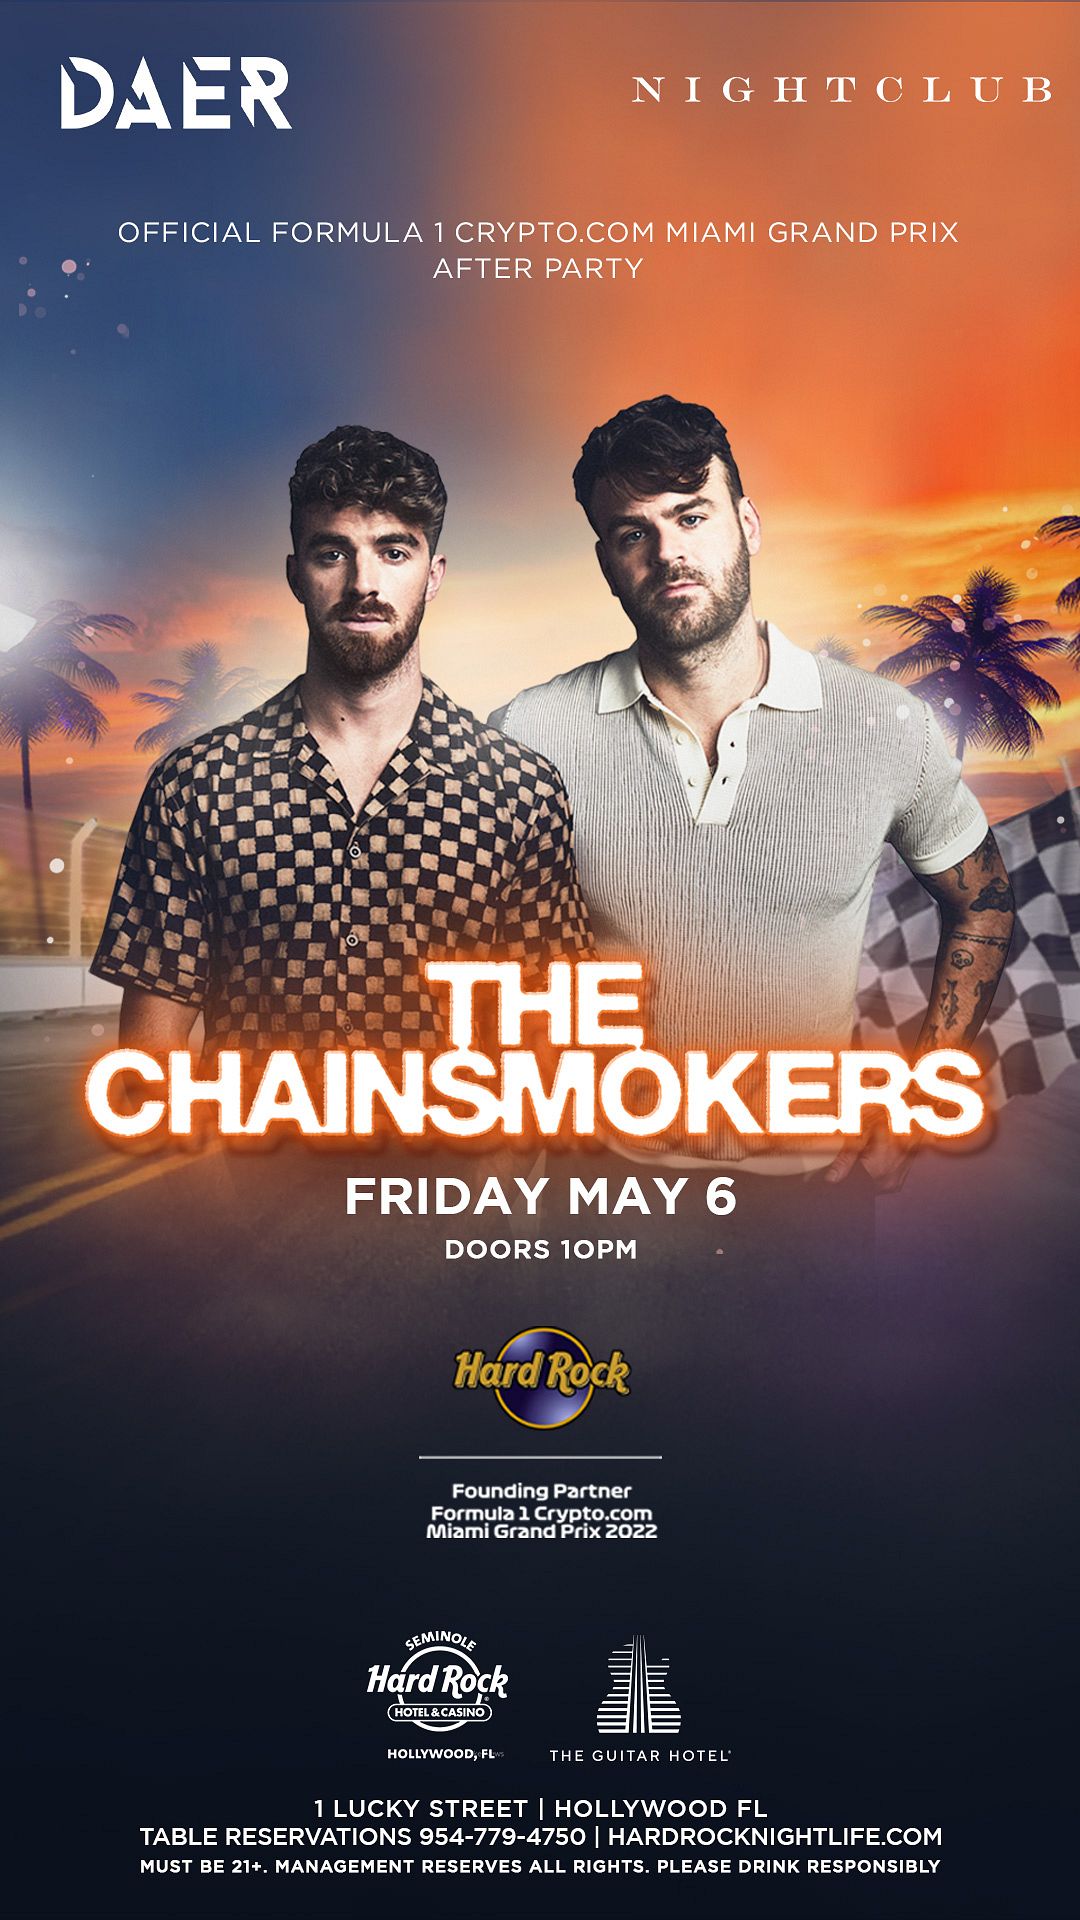 HD wallpaper: the chainsmokers | Wallpaper Flare